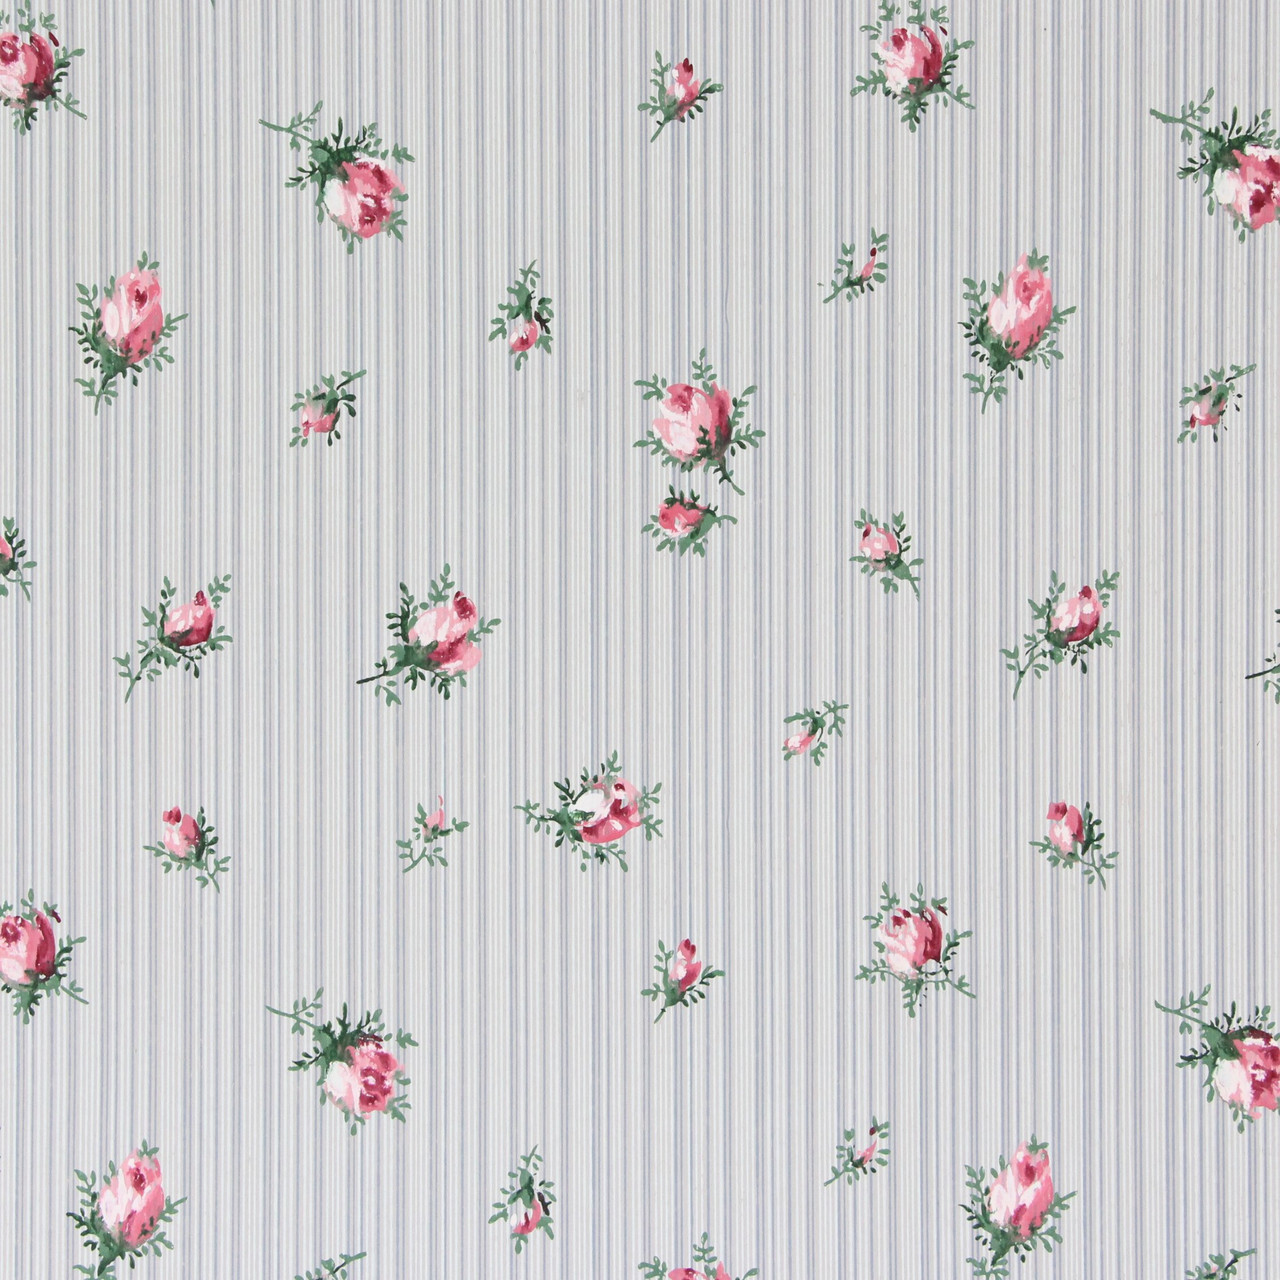 1940s Vintage Wallpaper by the Yard Floral Wallpaper With  Etsy  Vintage  wallpaper Vintage floral wallpapers Retro wallpaper